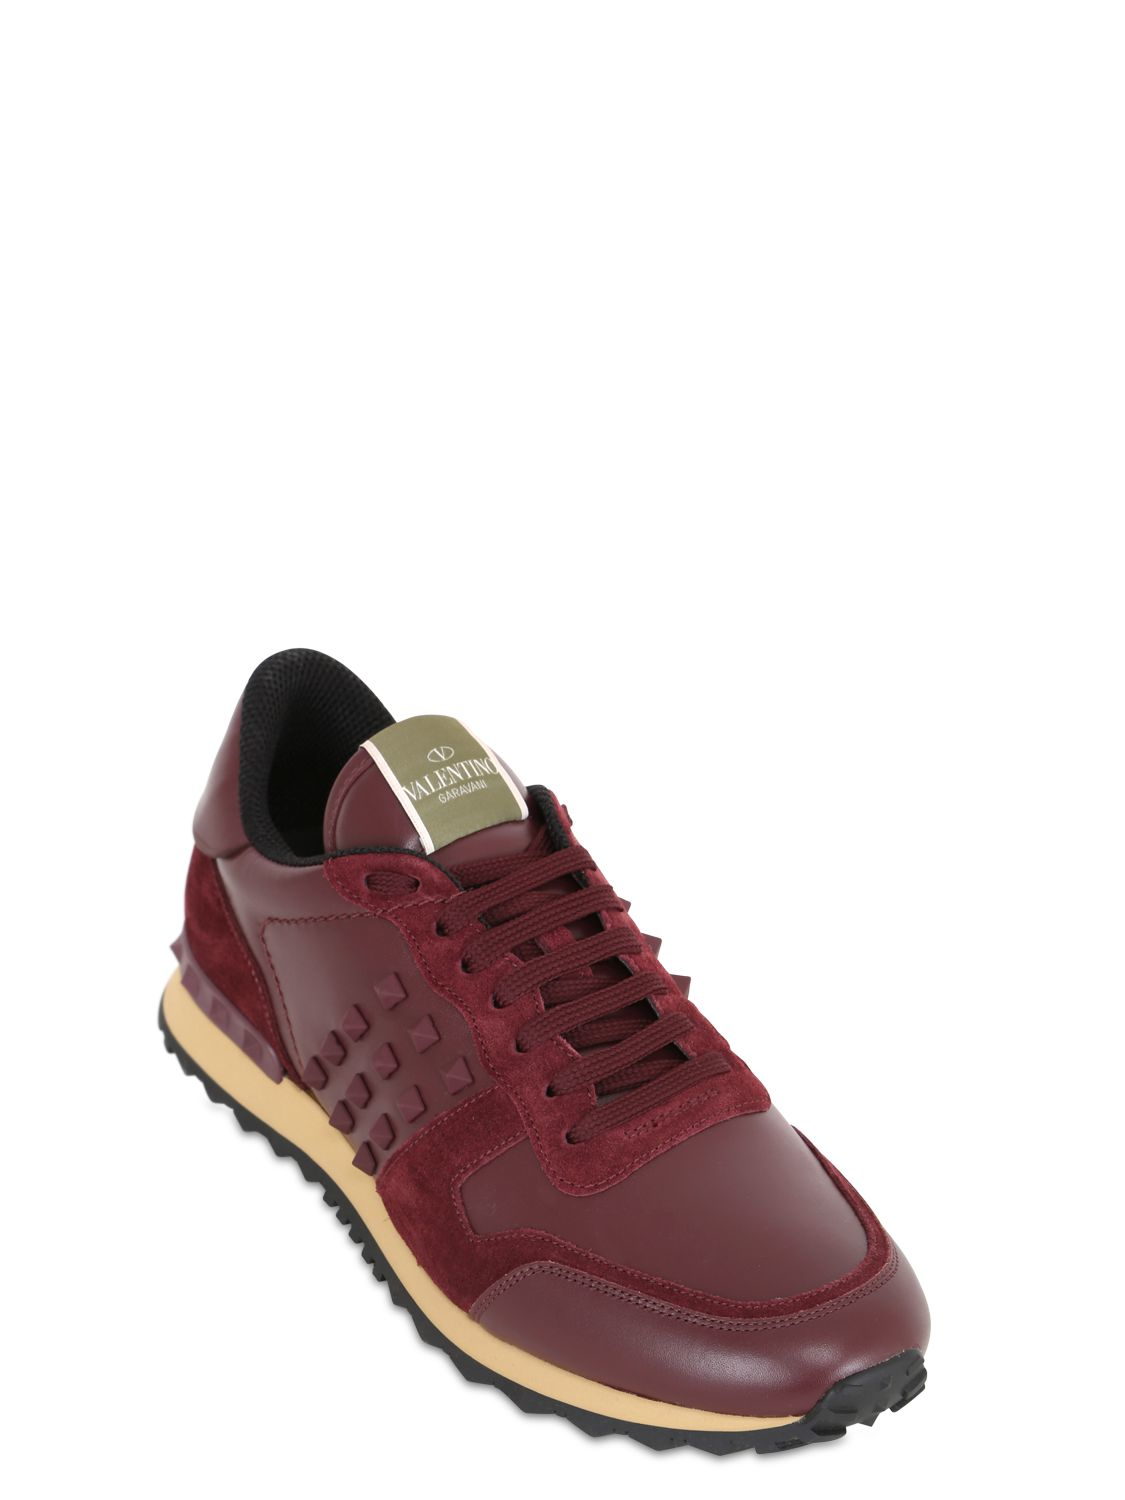 Valentino Rockstud Leather & Suede Sneakers in Burgundy (Purple) for ...